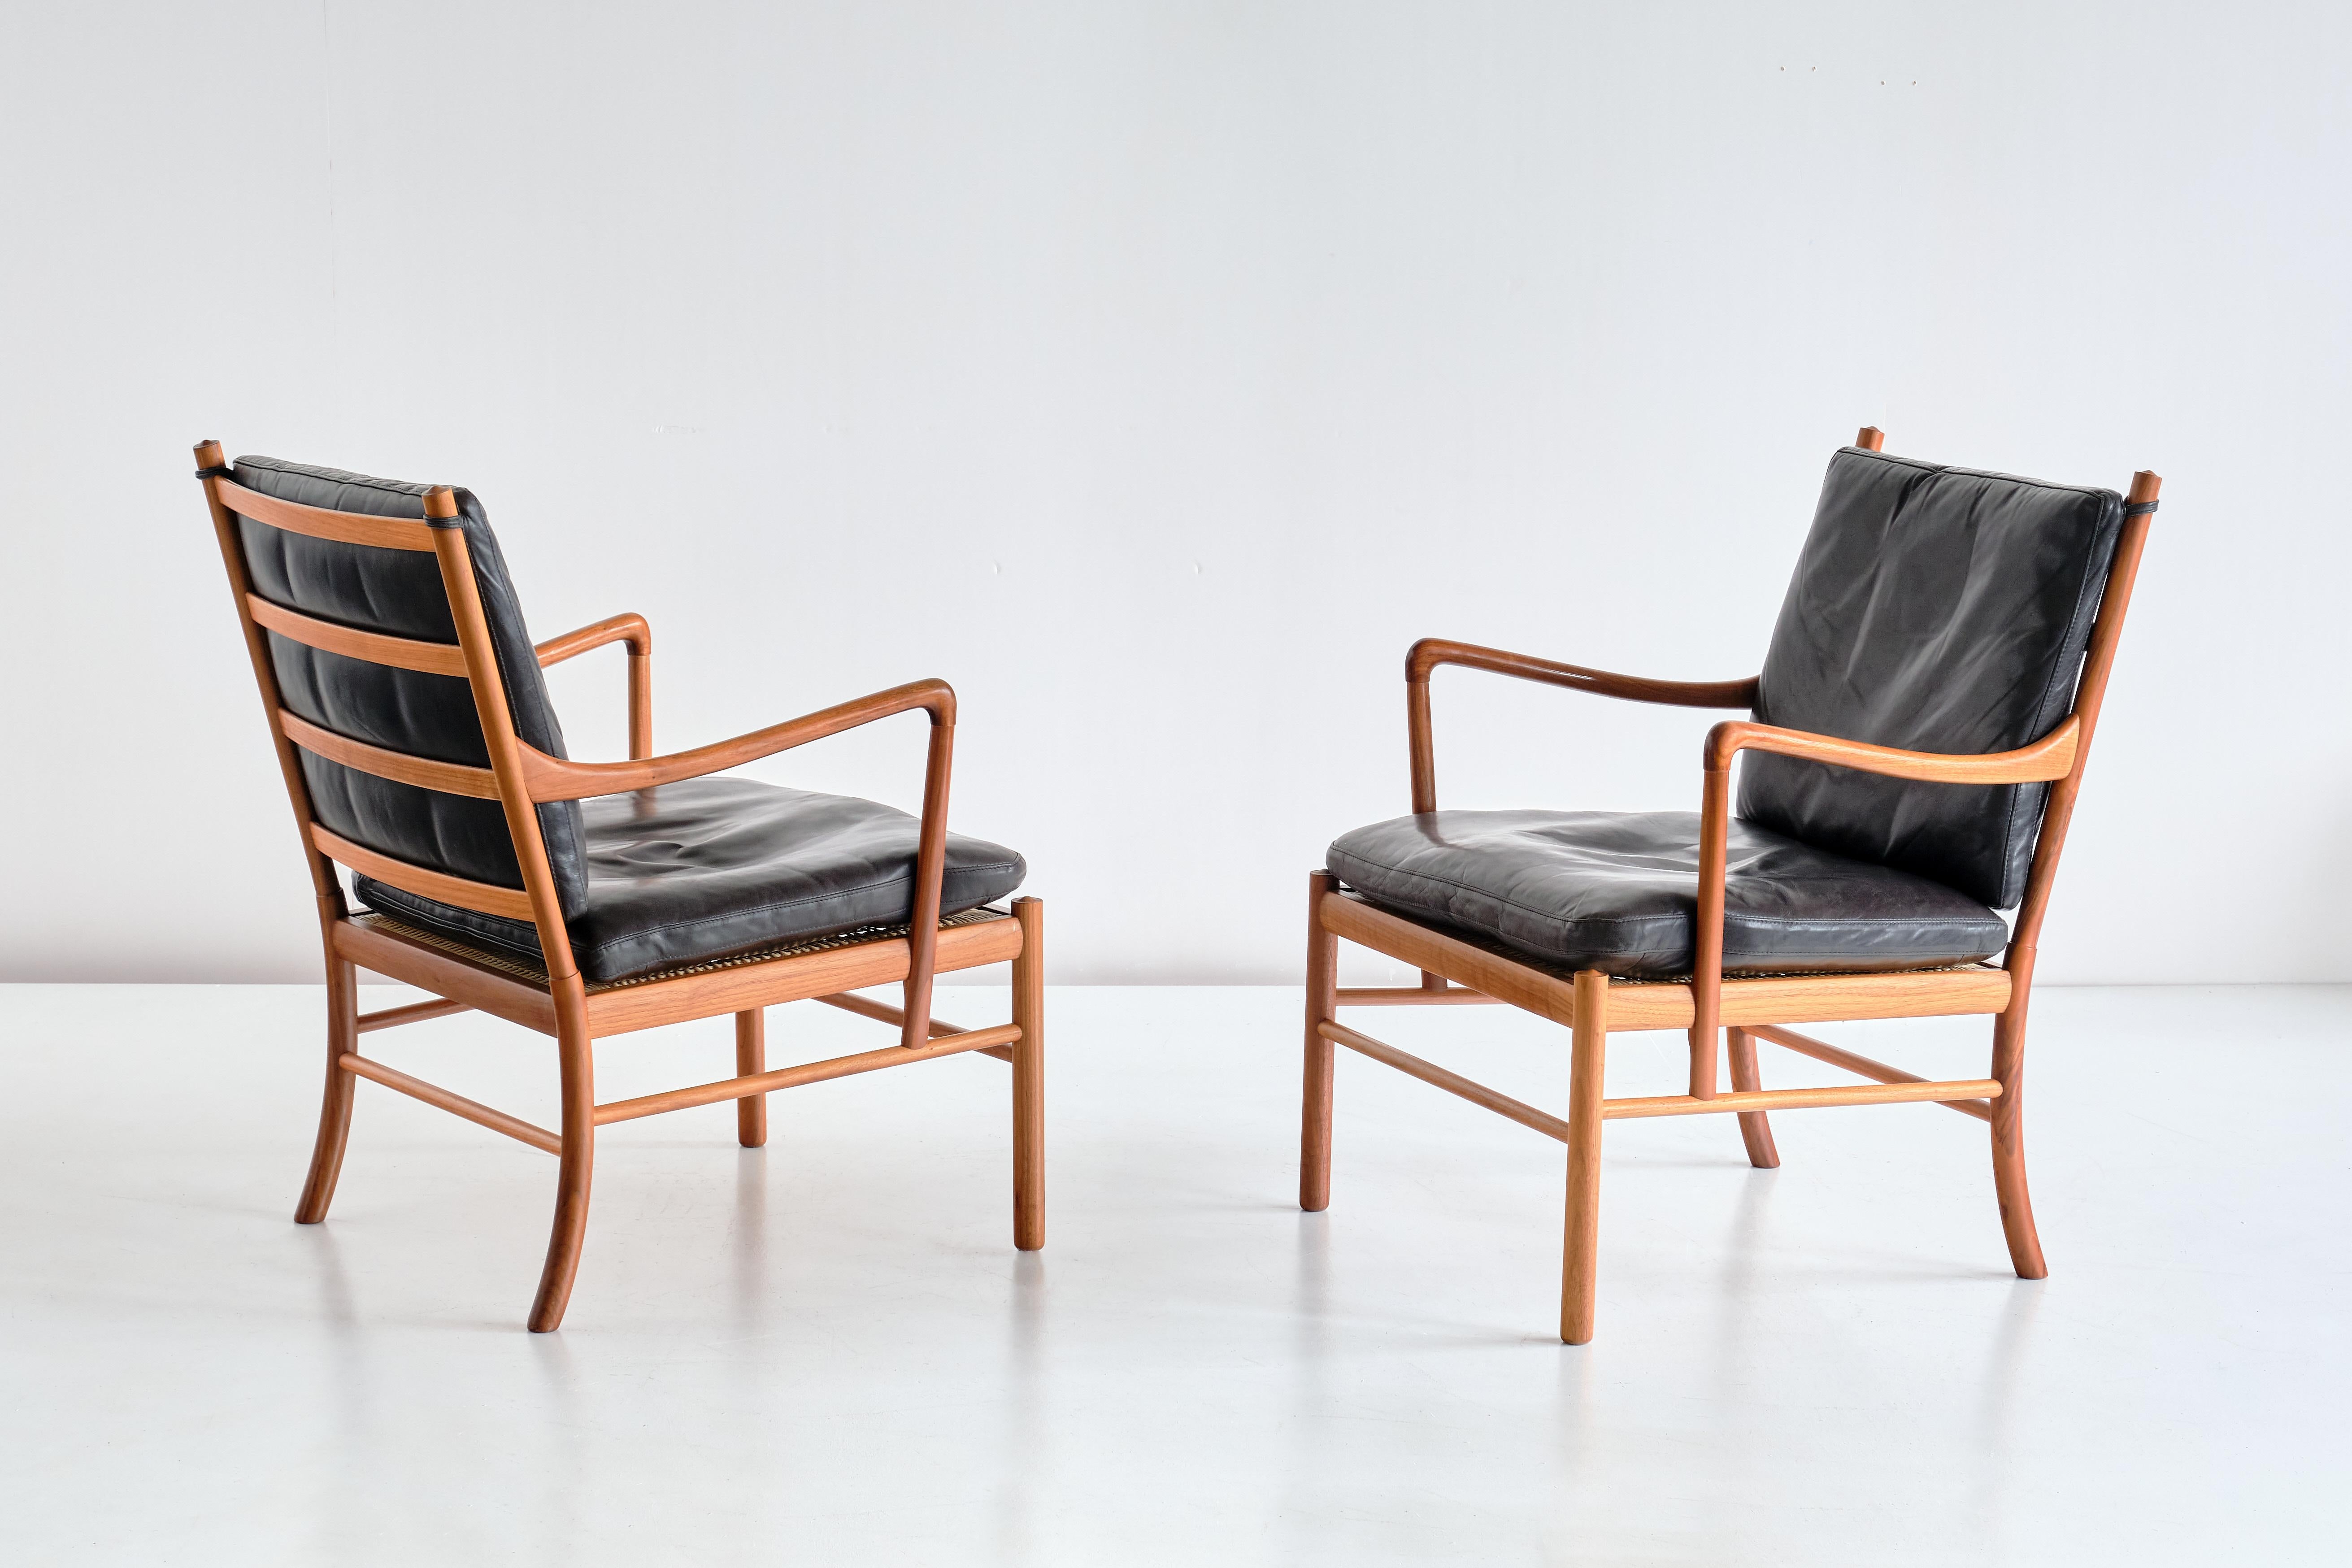 This elegant pair of armchairs was designed by Ole Wanscher and produced by Poul Jeppesen Møbelfabrik in Denmark in the 1950s. This model was numbered 149 and is also known as the 'Colonial Chair'. 
Solid walnut wood frame with the horizontal